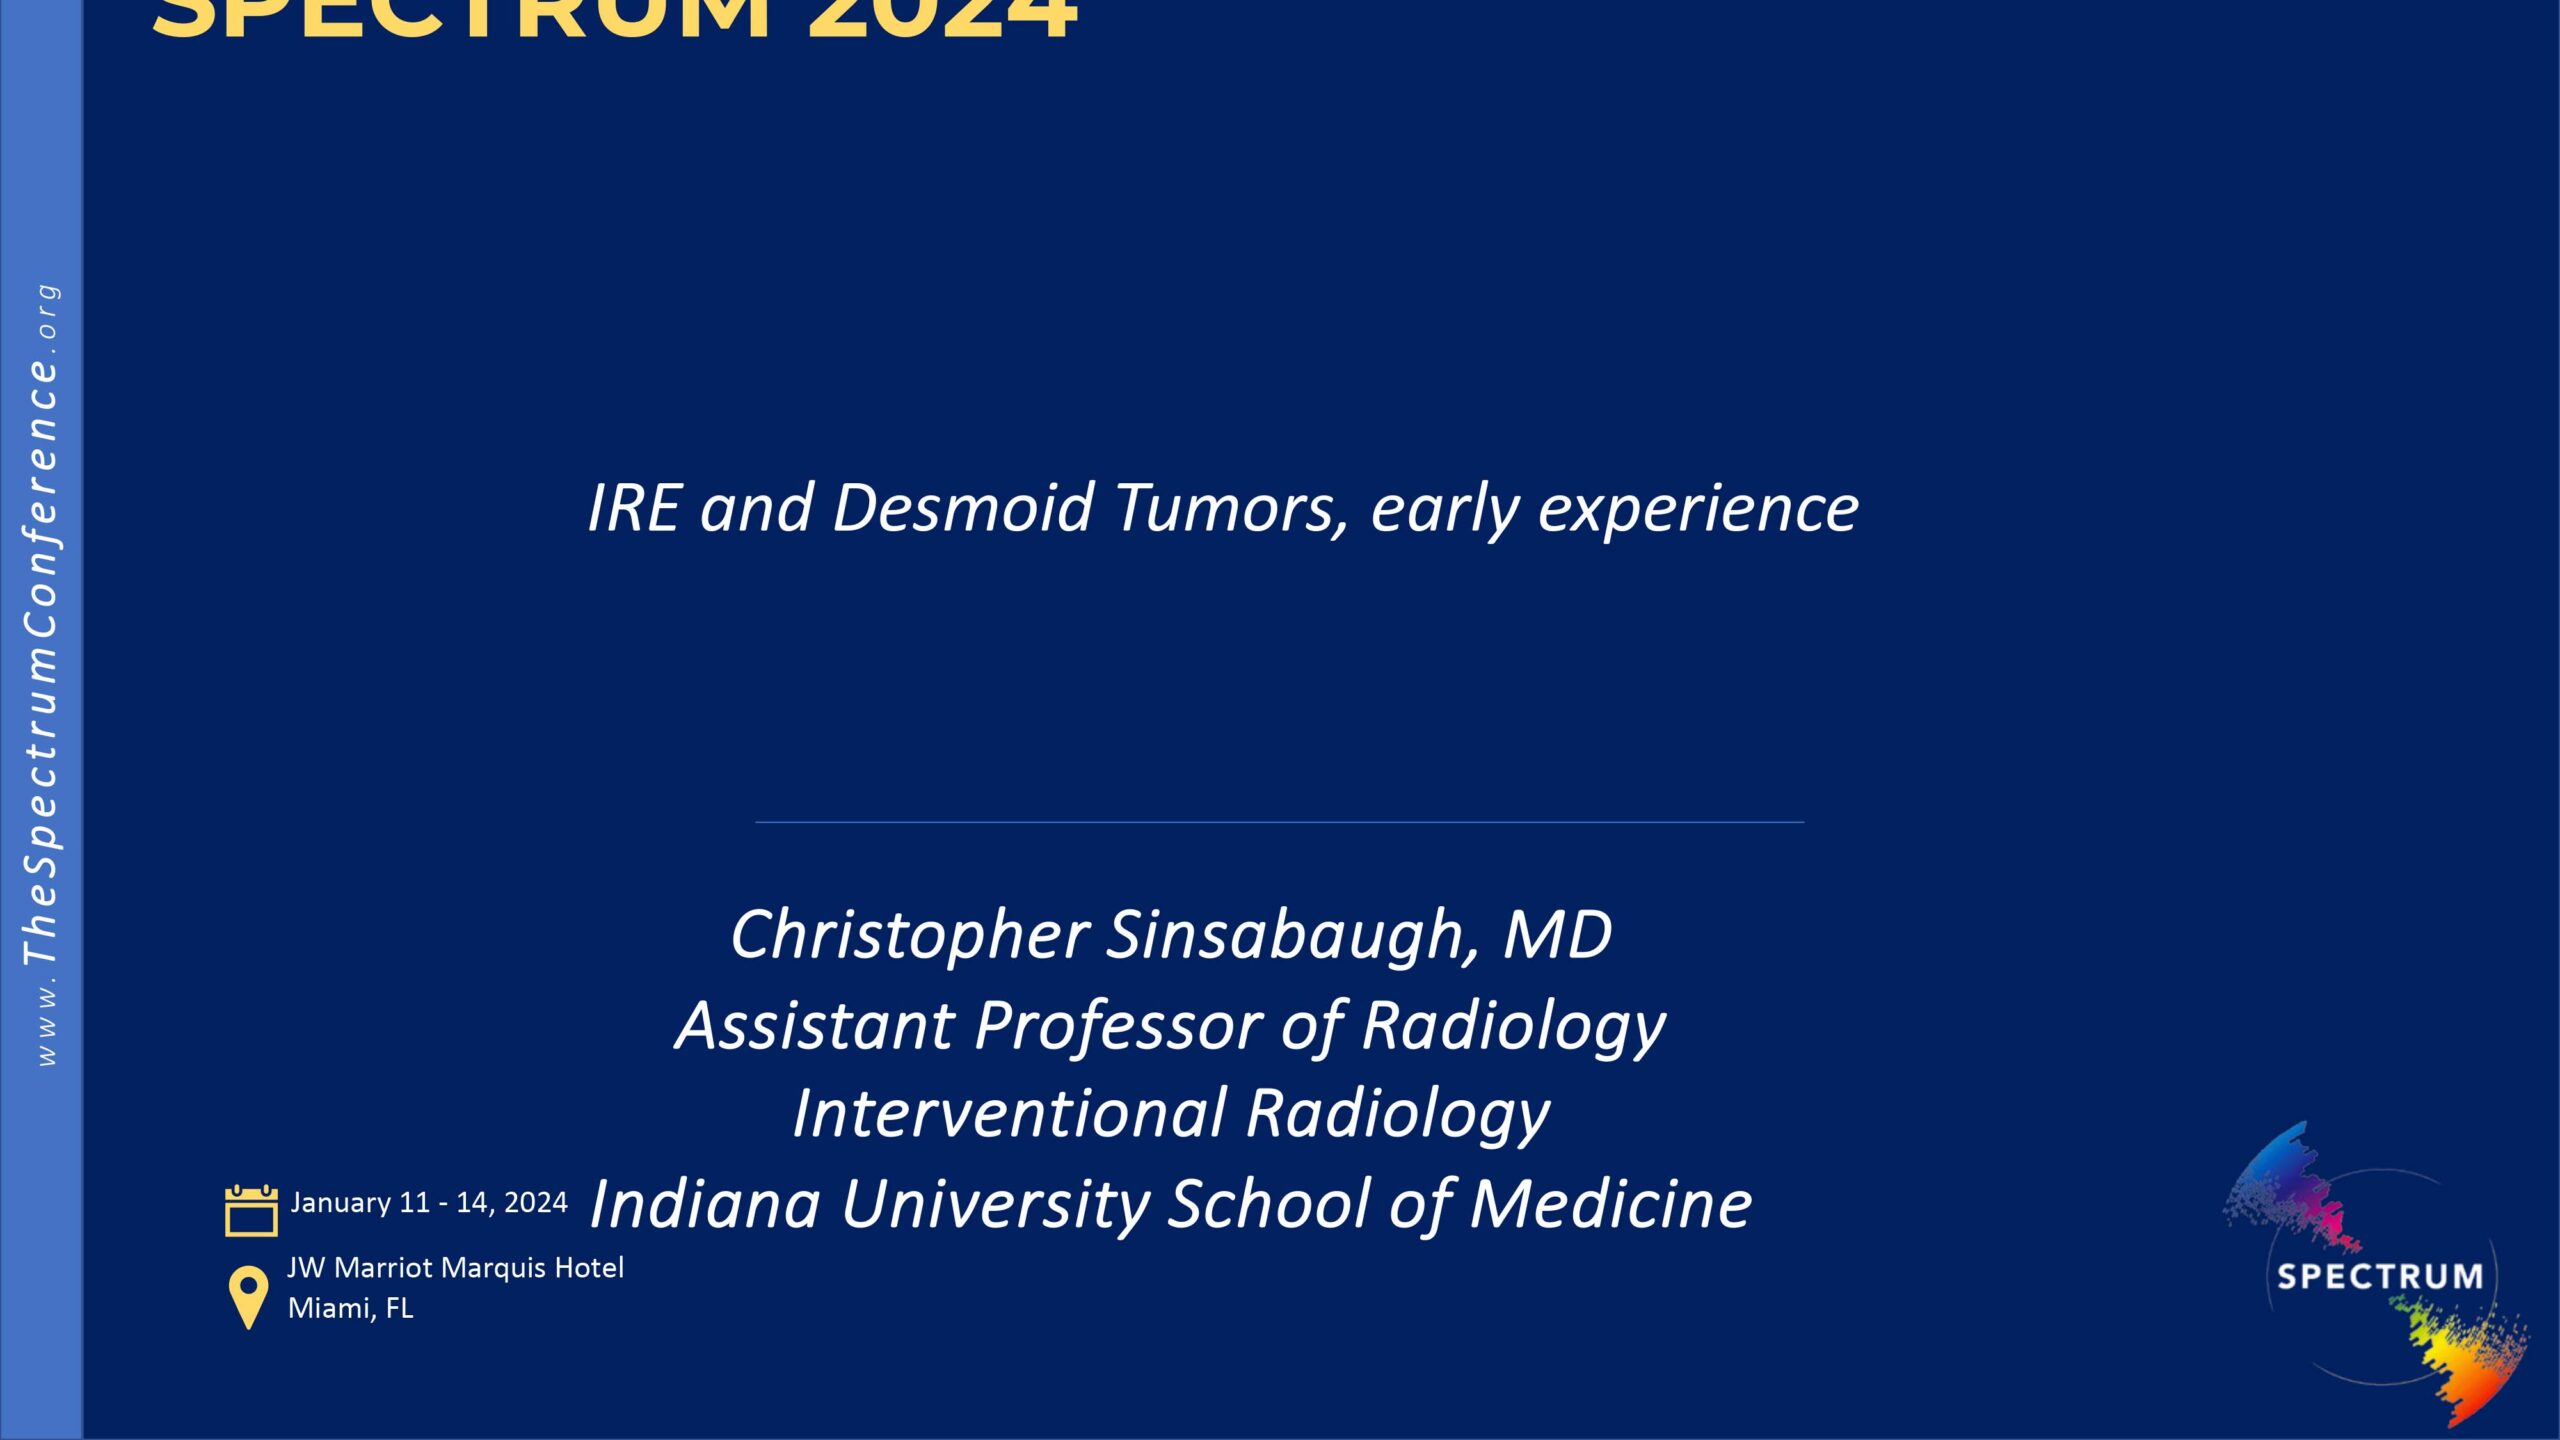 IRE and Desmoid tumors, early experience